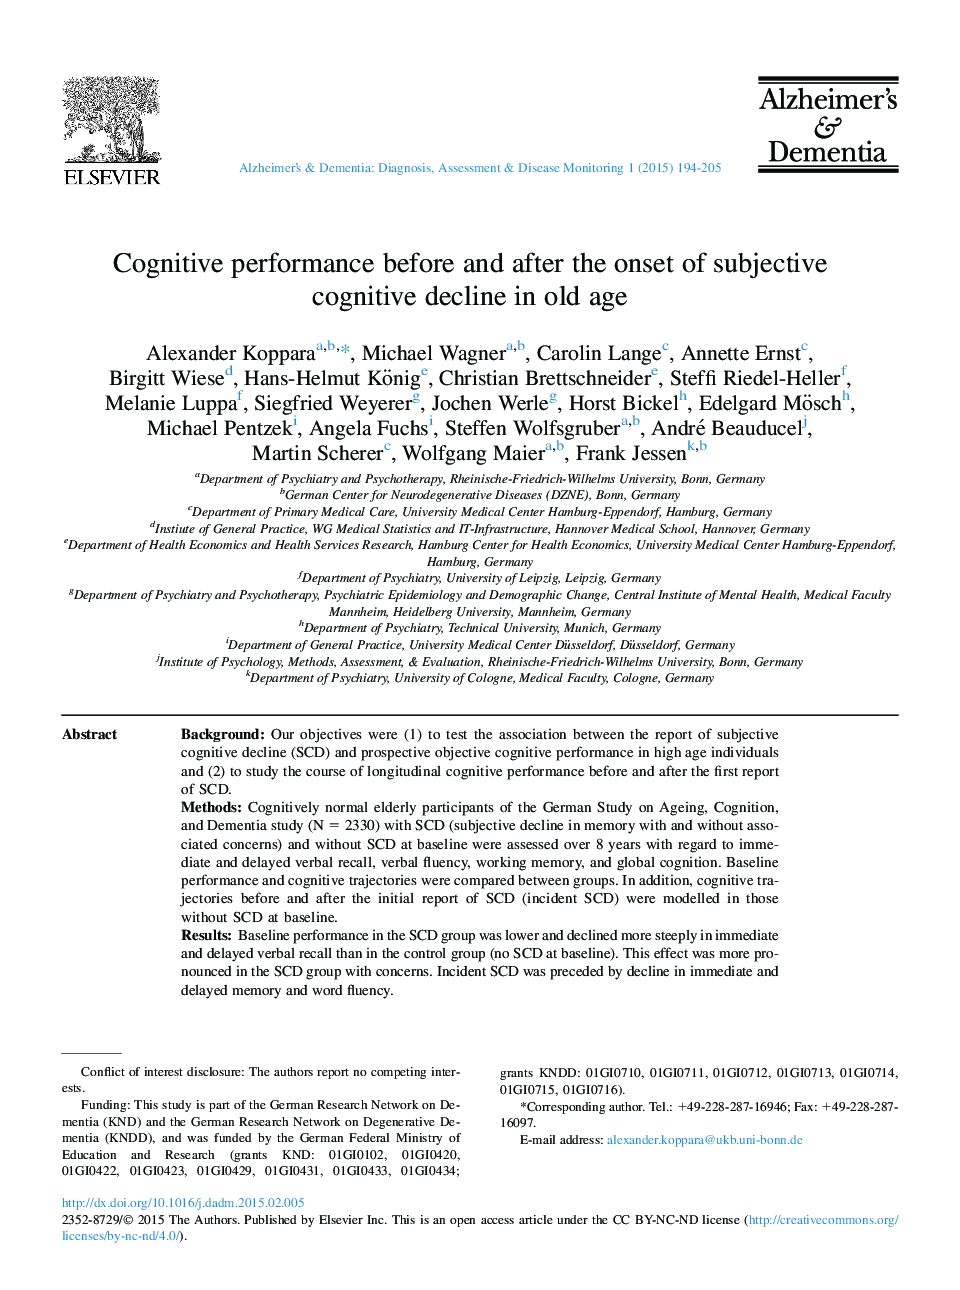 Cognitive performance before and after the onset of subjective cognitive decline in old age 